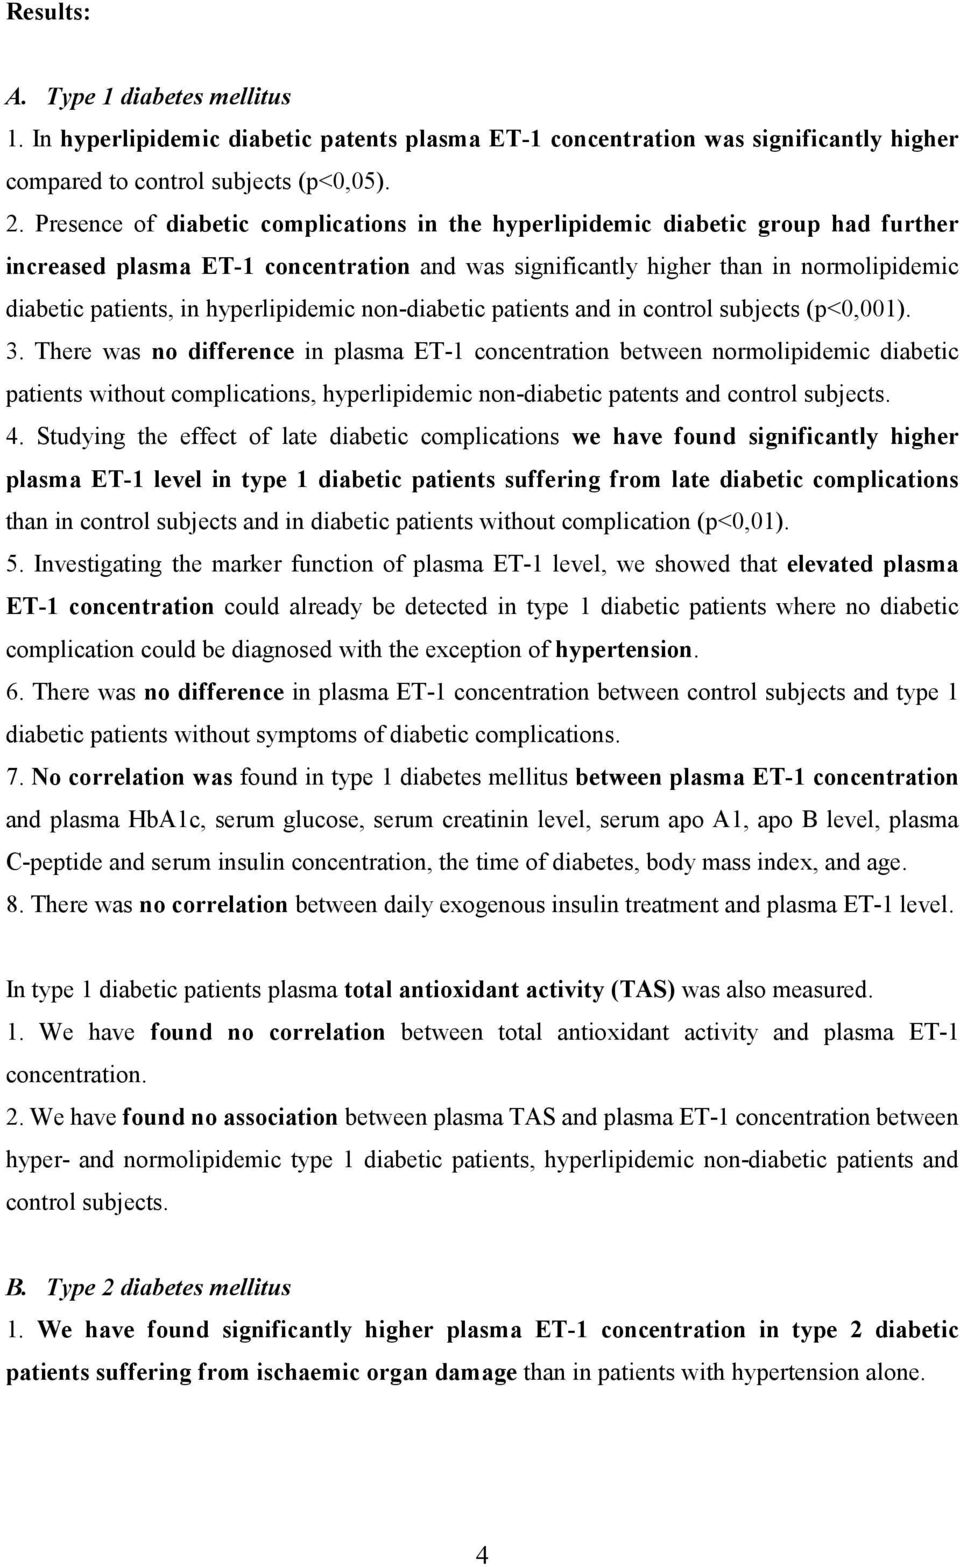 hyperlipidemic non-diabetic patients and in control subjects (p<0,001). 3.